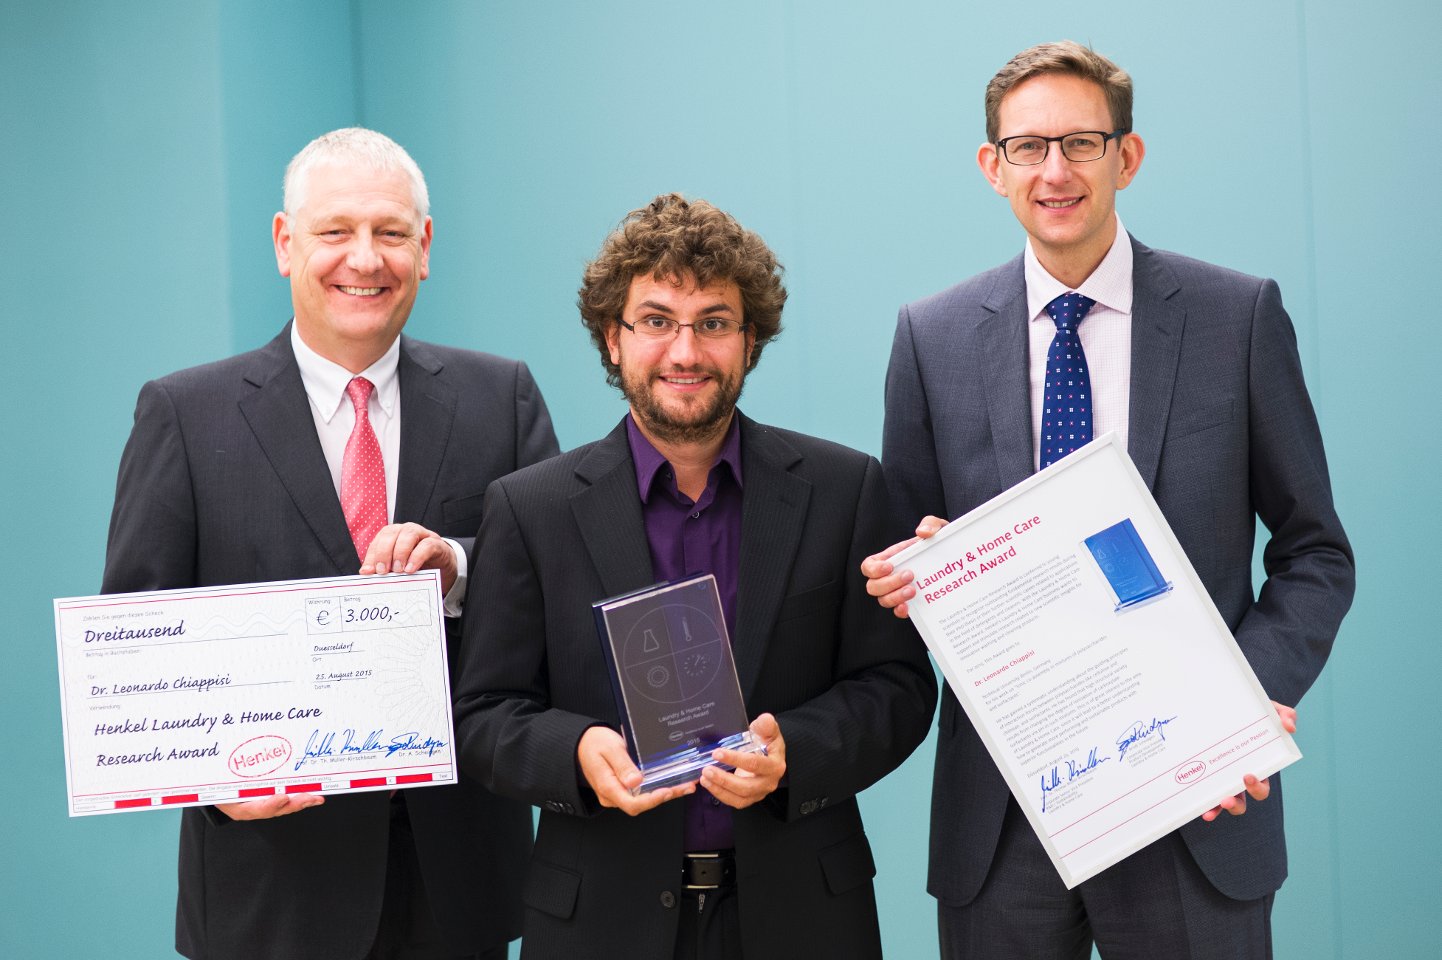 Prof. Dr. Thomas Müller-Kirschbaum (left), Head of Global Research and Development at the Laundry & Home Care business unit, and Dr. Michael Dreja, Head of Global Research at Laundry & Home Care, present the "Laundry & Home Care Research Award 2015" to Dr. Leonardo Chiappisi (center).